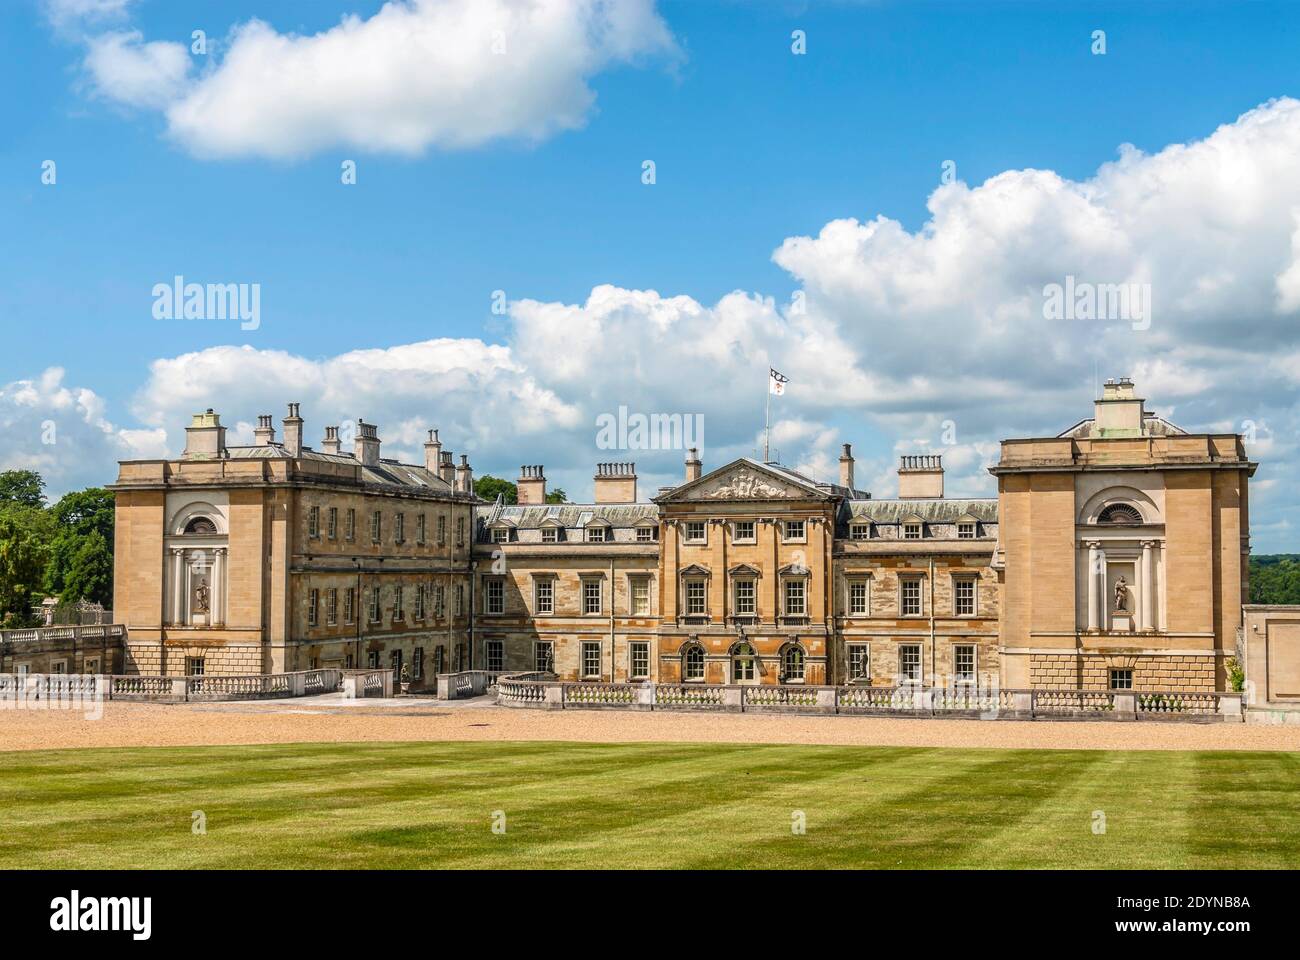 Main building of the Woburn Abbey, Bedfordshire, England Stock Photo